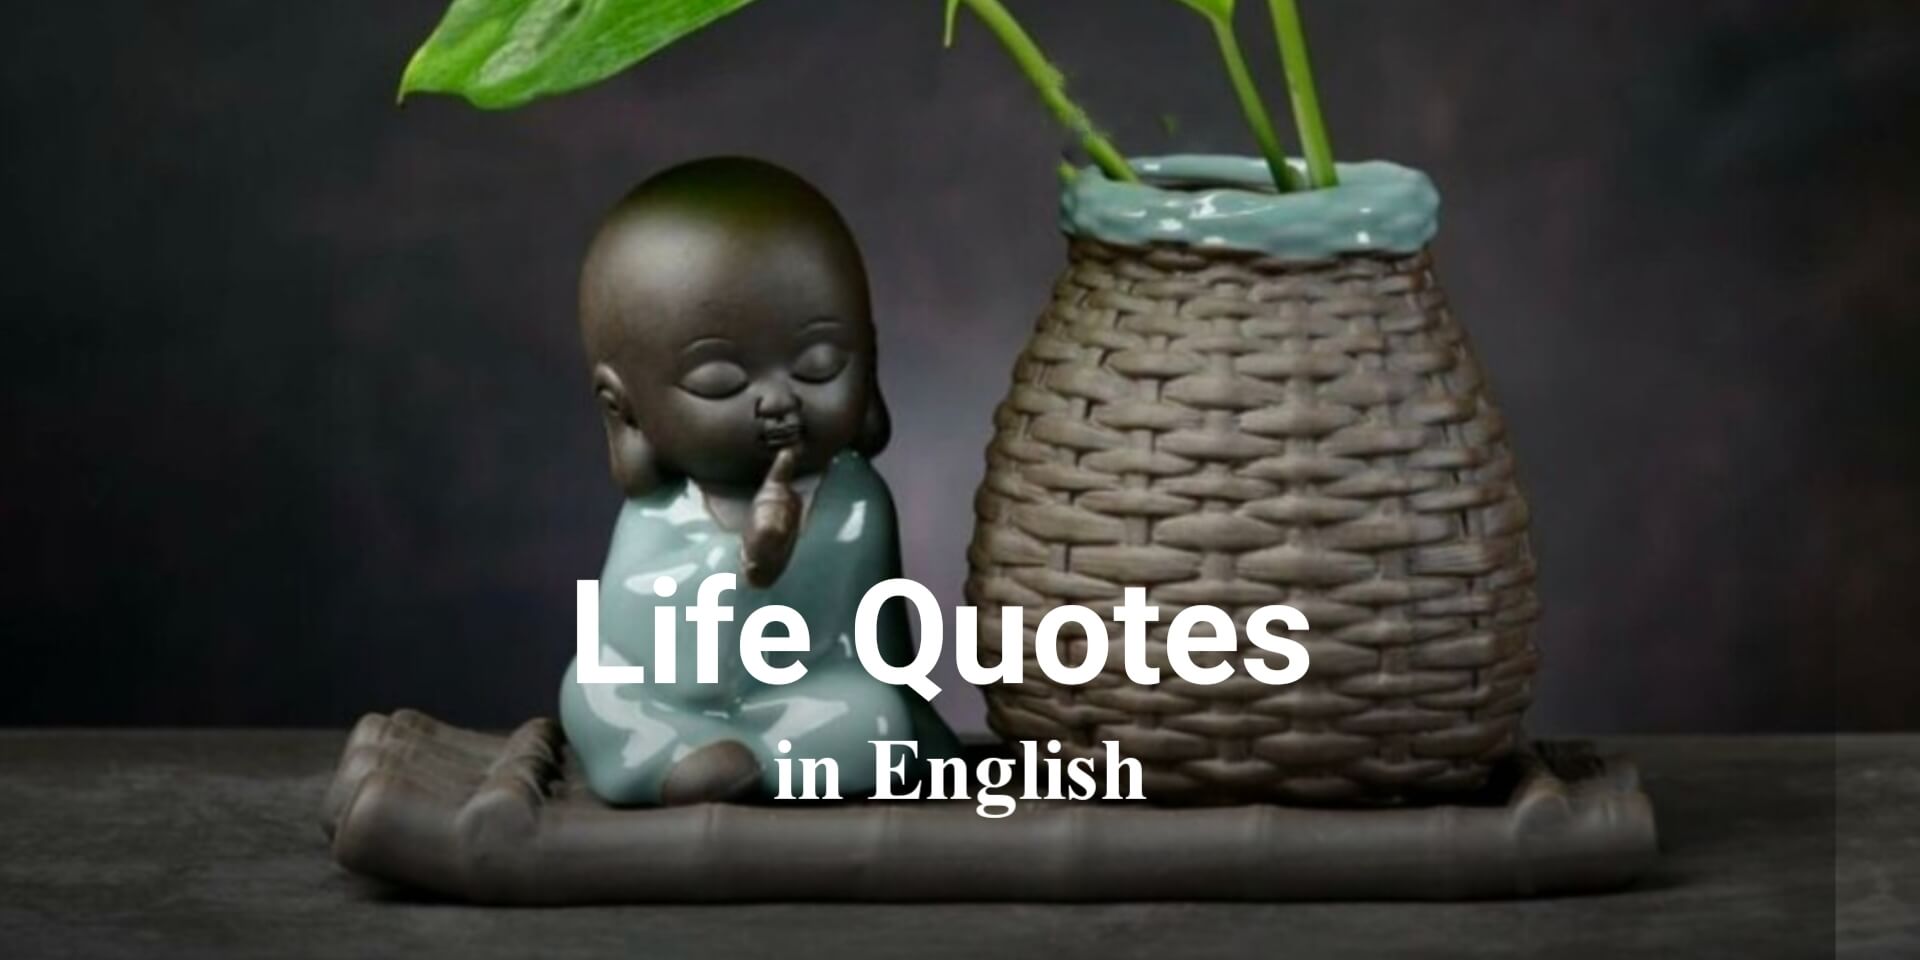 Life Quotes in English